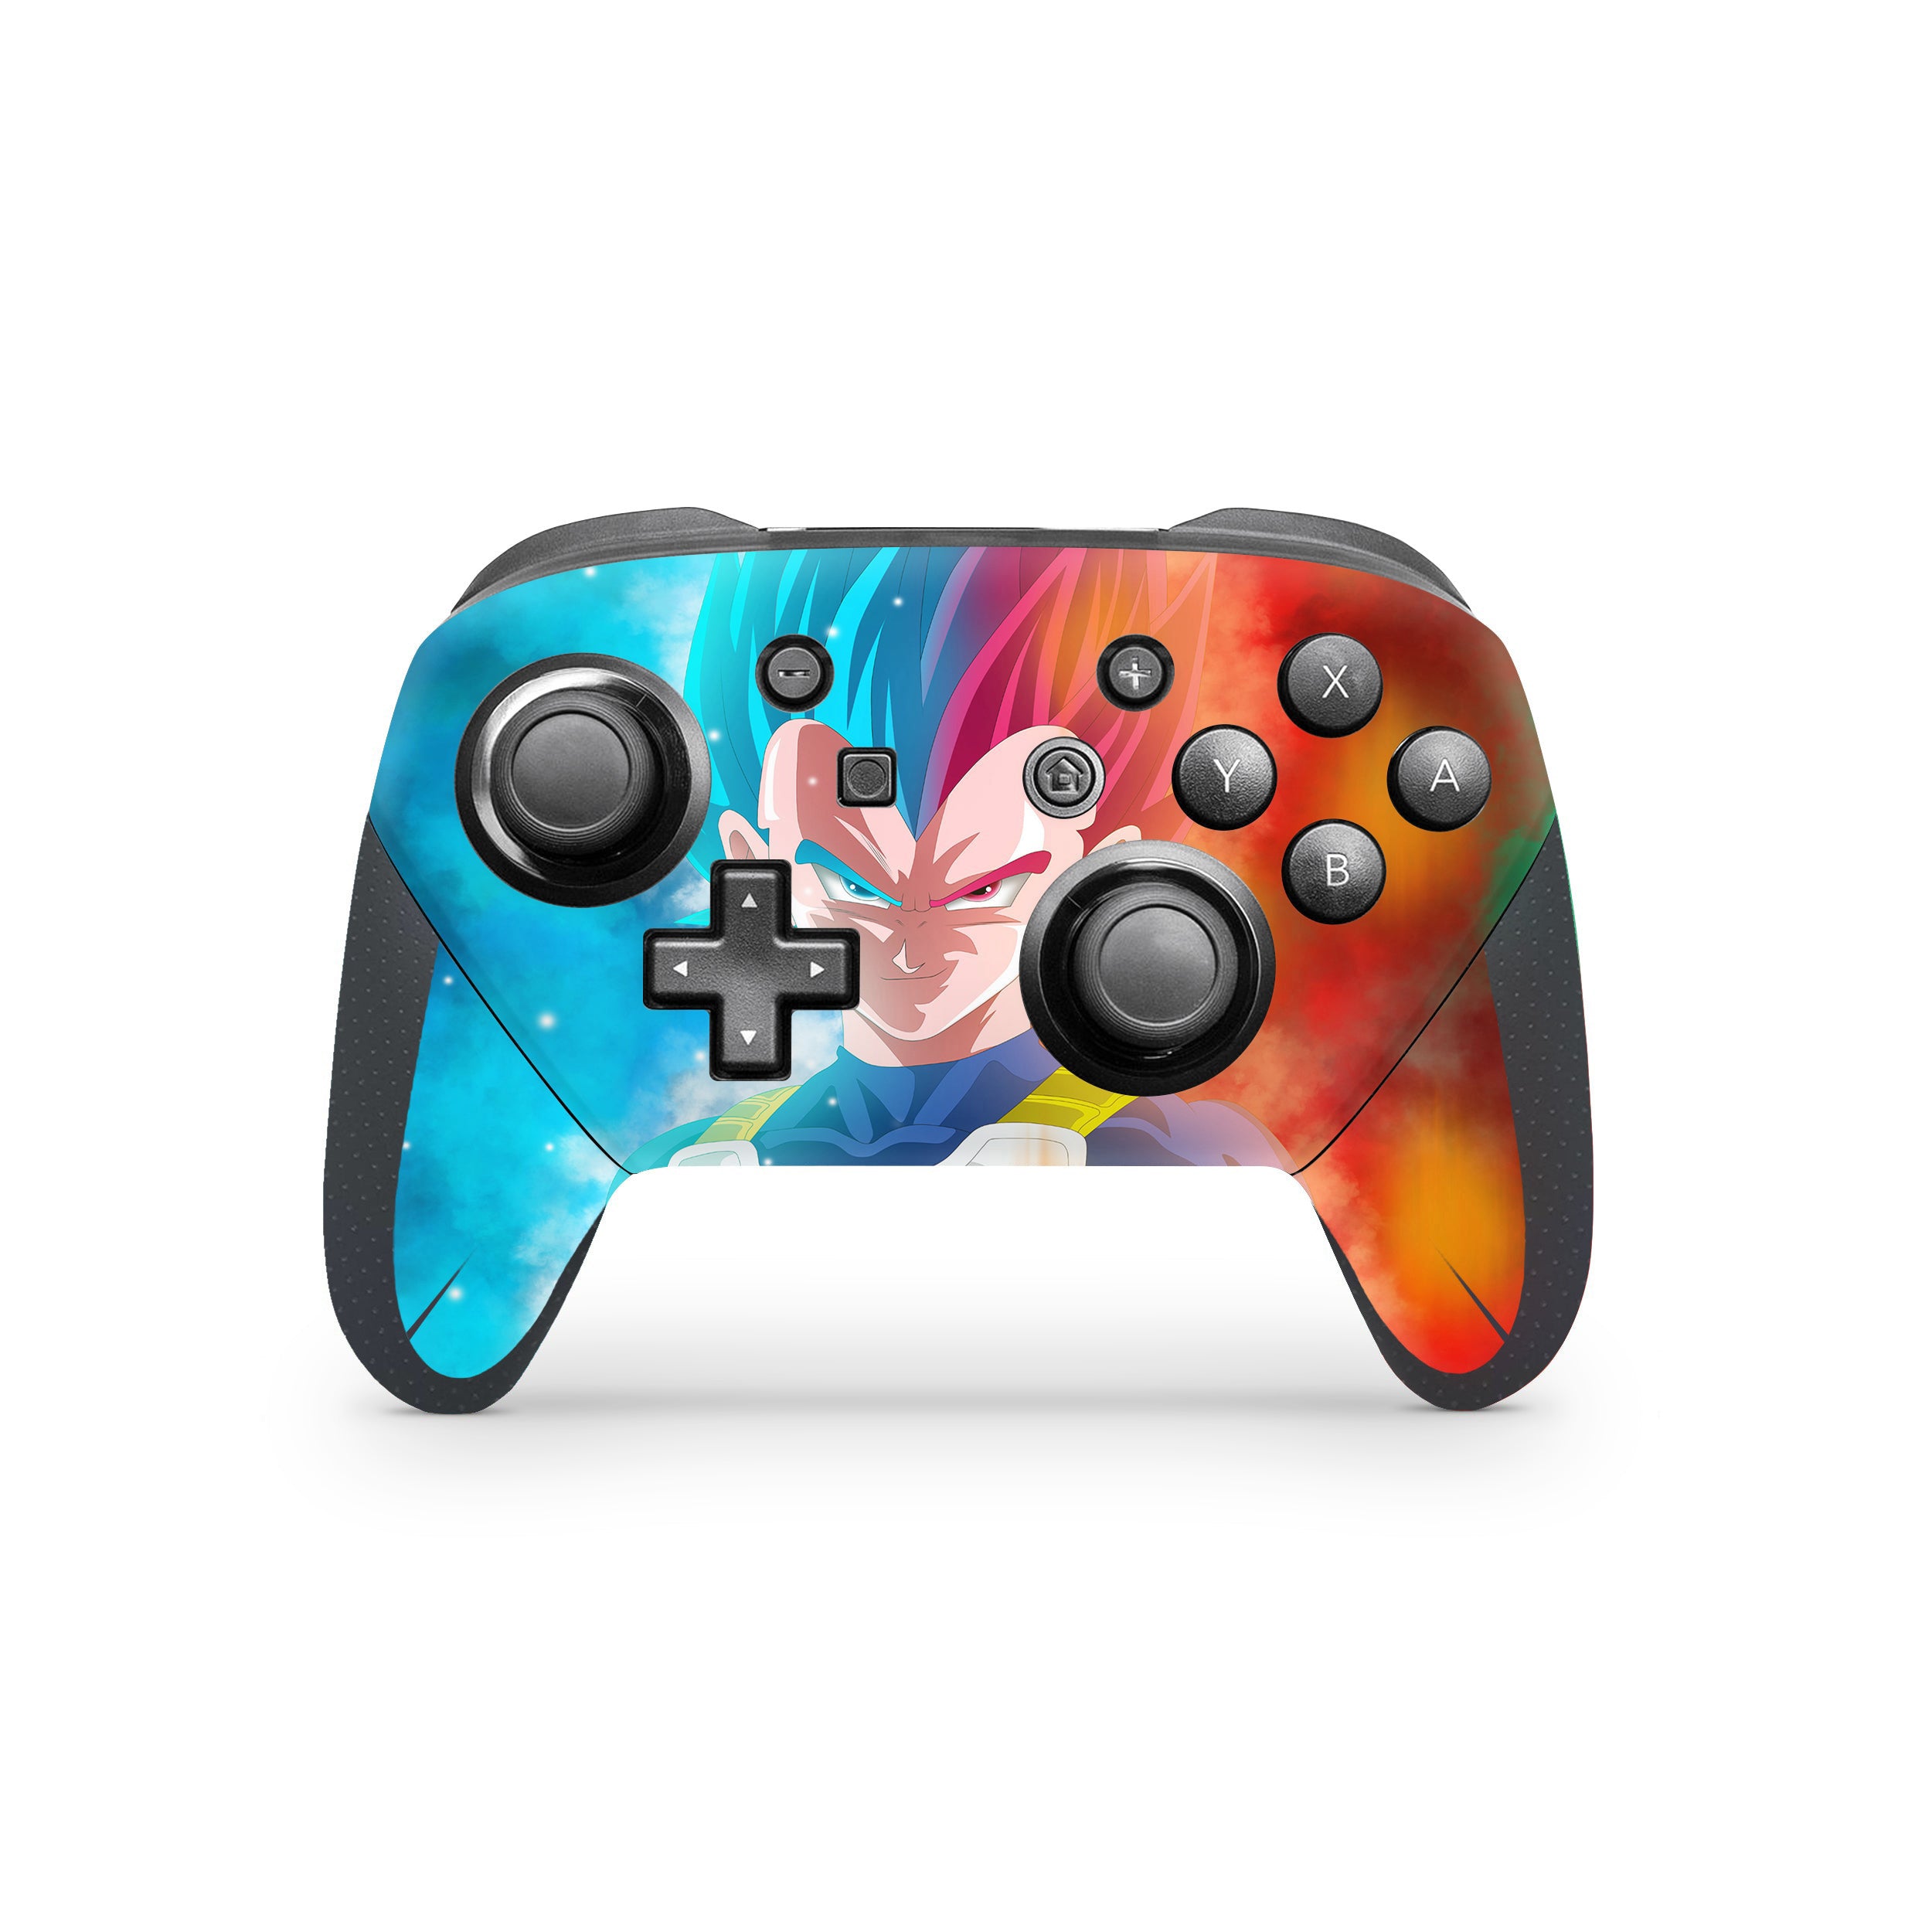 A video game skin featuring a Dragon Ball Super Vegeta design for the Switch Pro Controller.